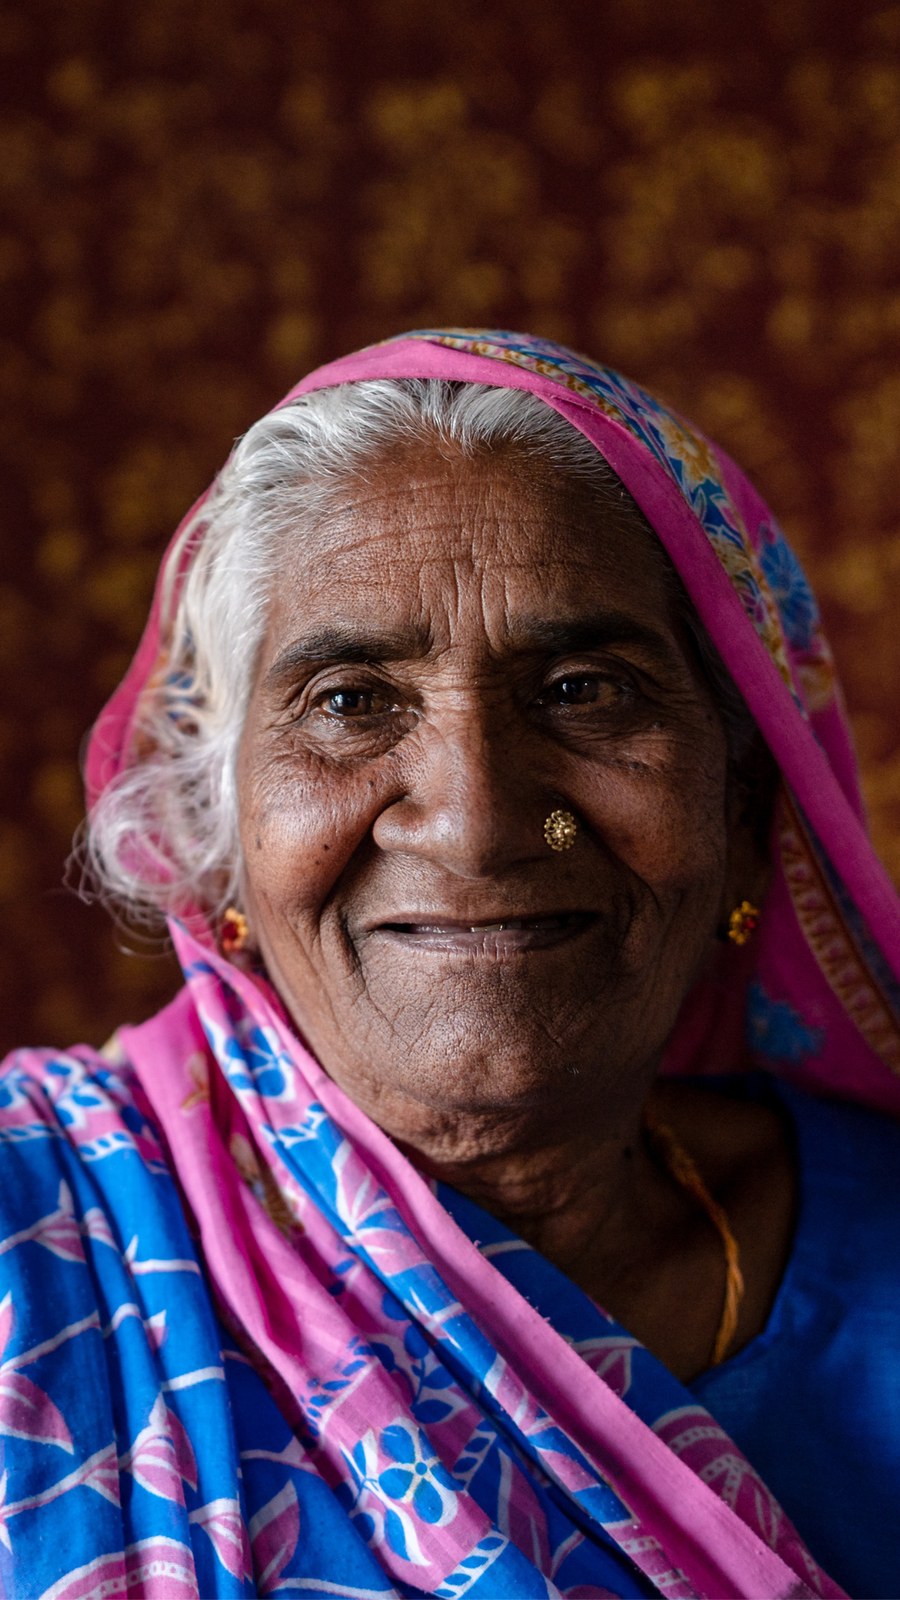 A woman from Nepal in a headscarf looks at the camera